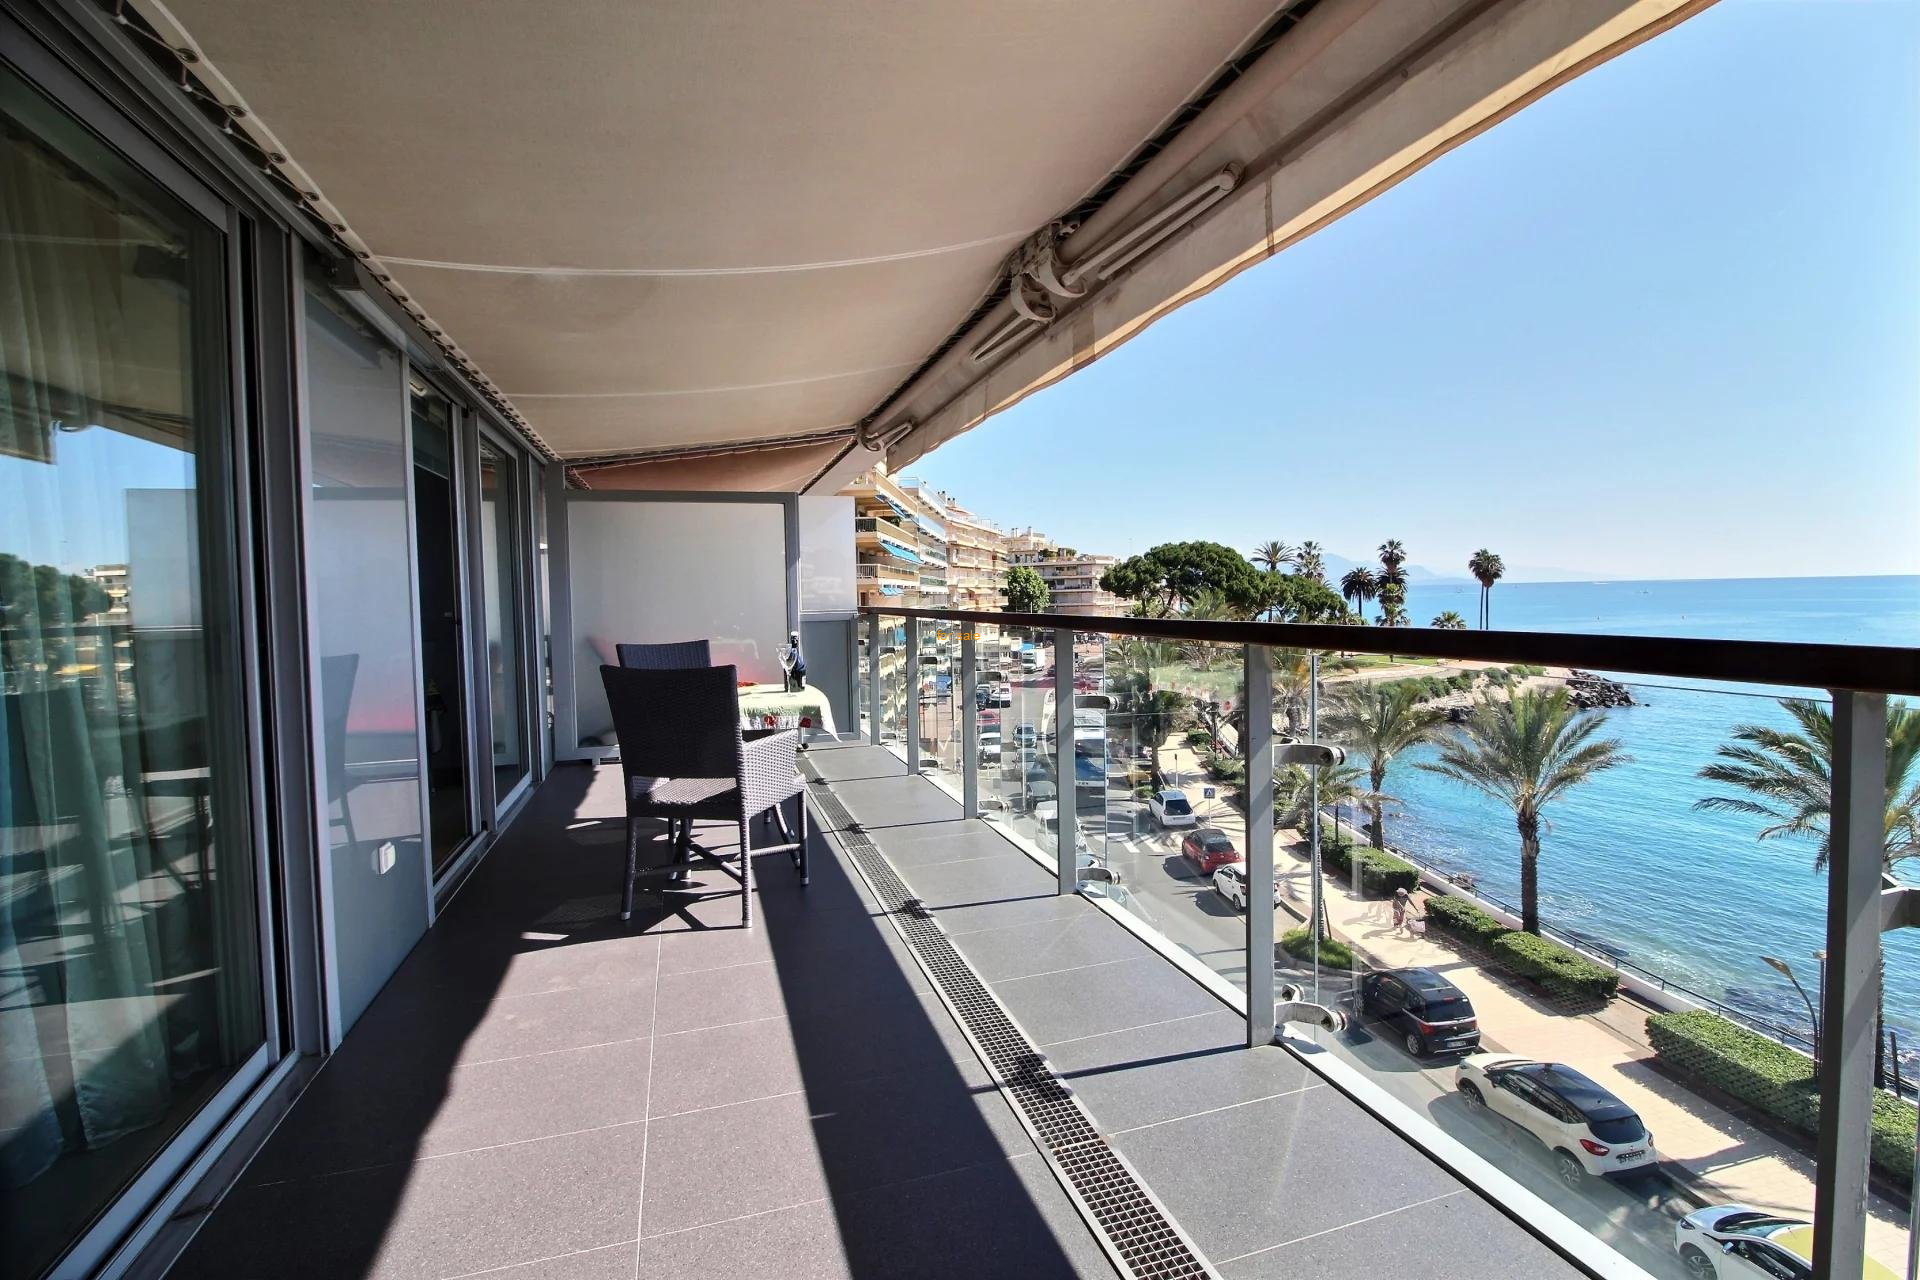 Hotel Royal 2 Bedroom apartment with panoramic sea view - Antibes Ilette